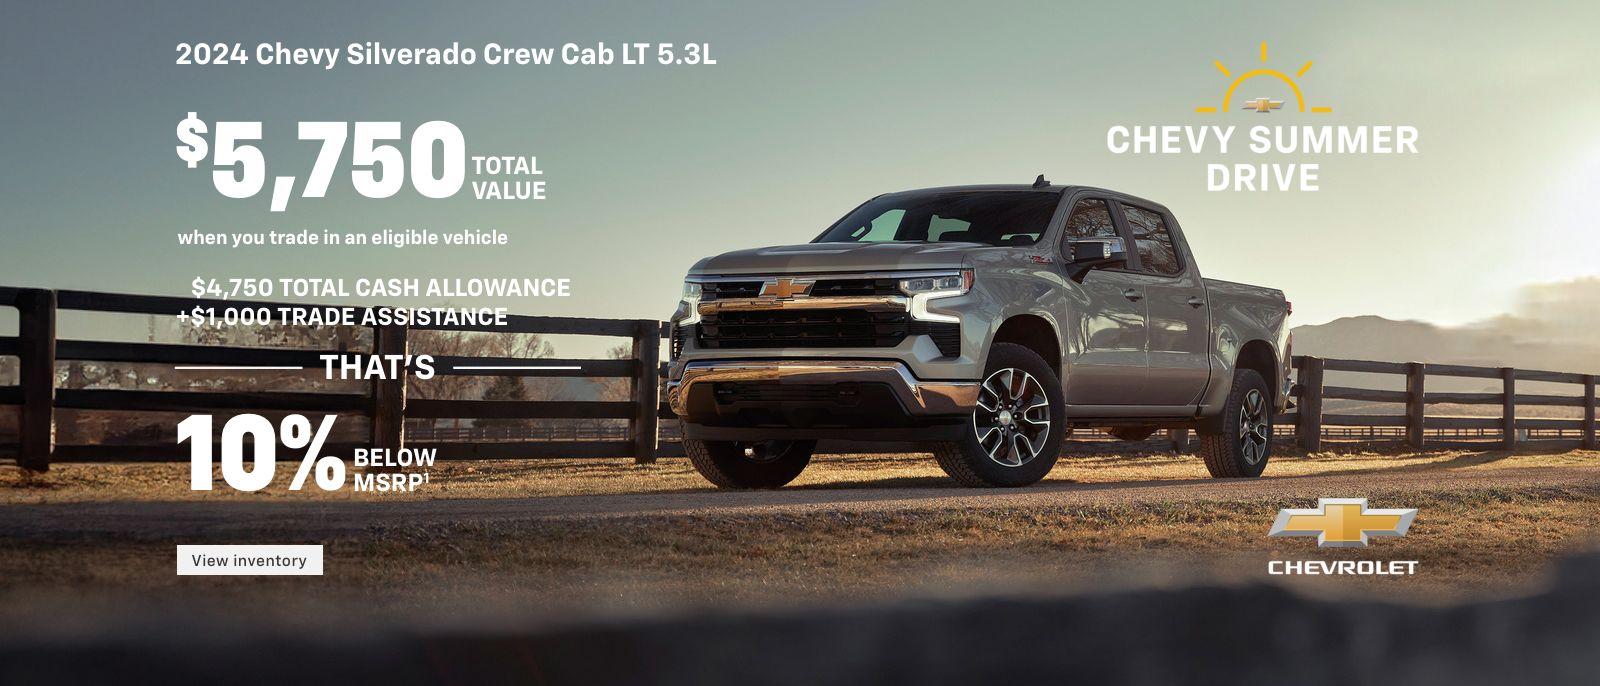 2024 Chevy Silverado 1500 Crew Cab LT 5.3L. Accept all challenges. $5,750 total value when you trade in an eligible vehicle. $4,750 total cash allowance + $1,000 trade assistance. That's, 10% below MSRP.